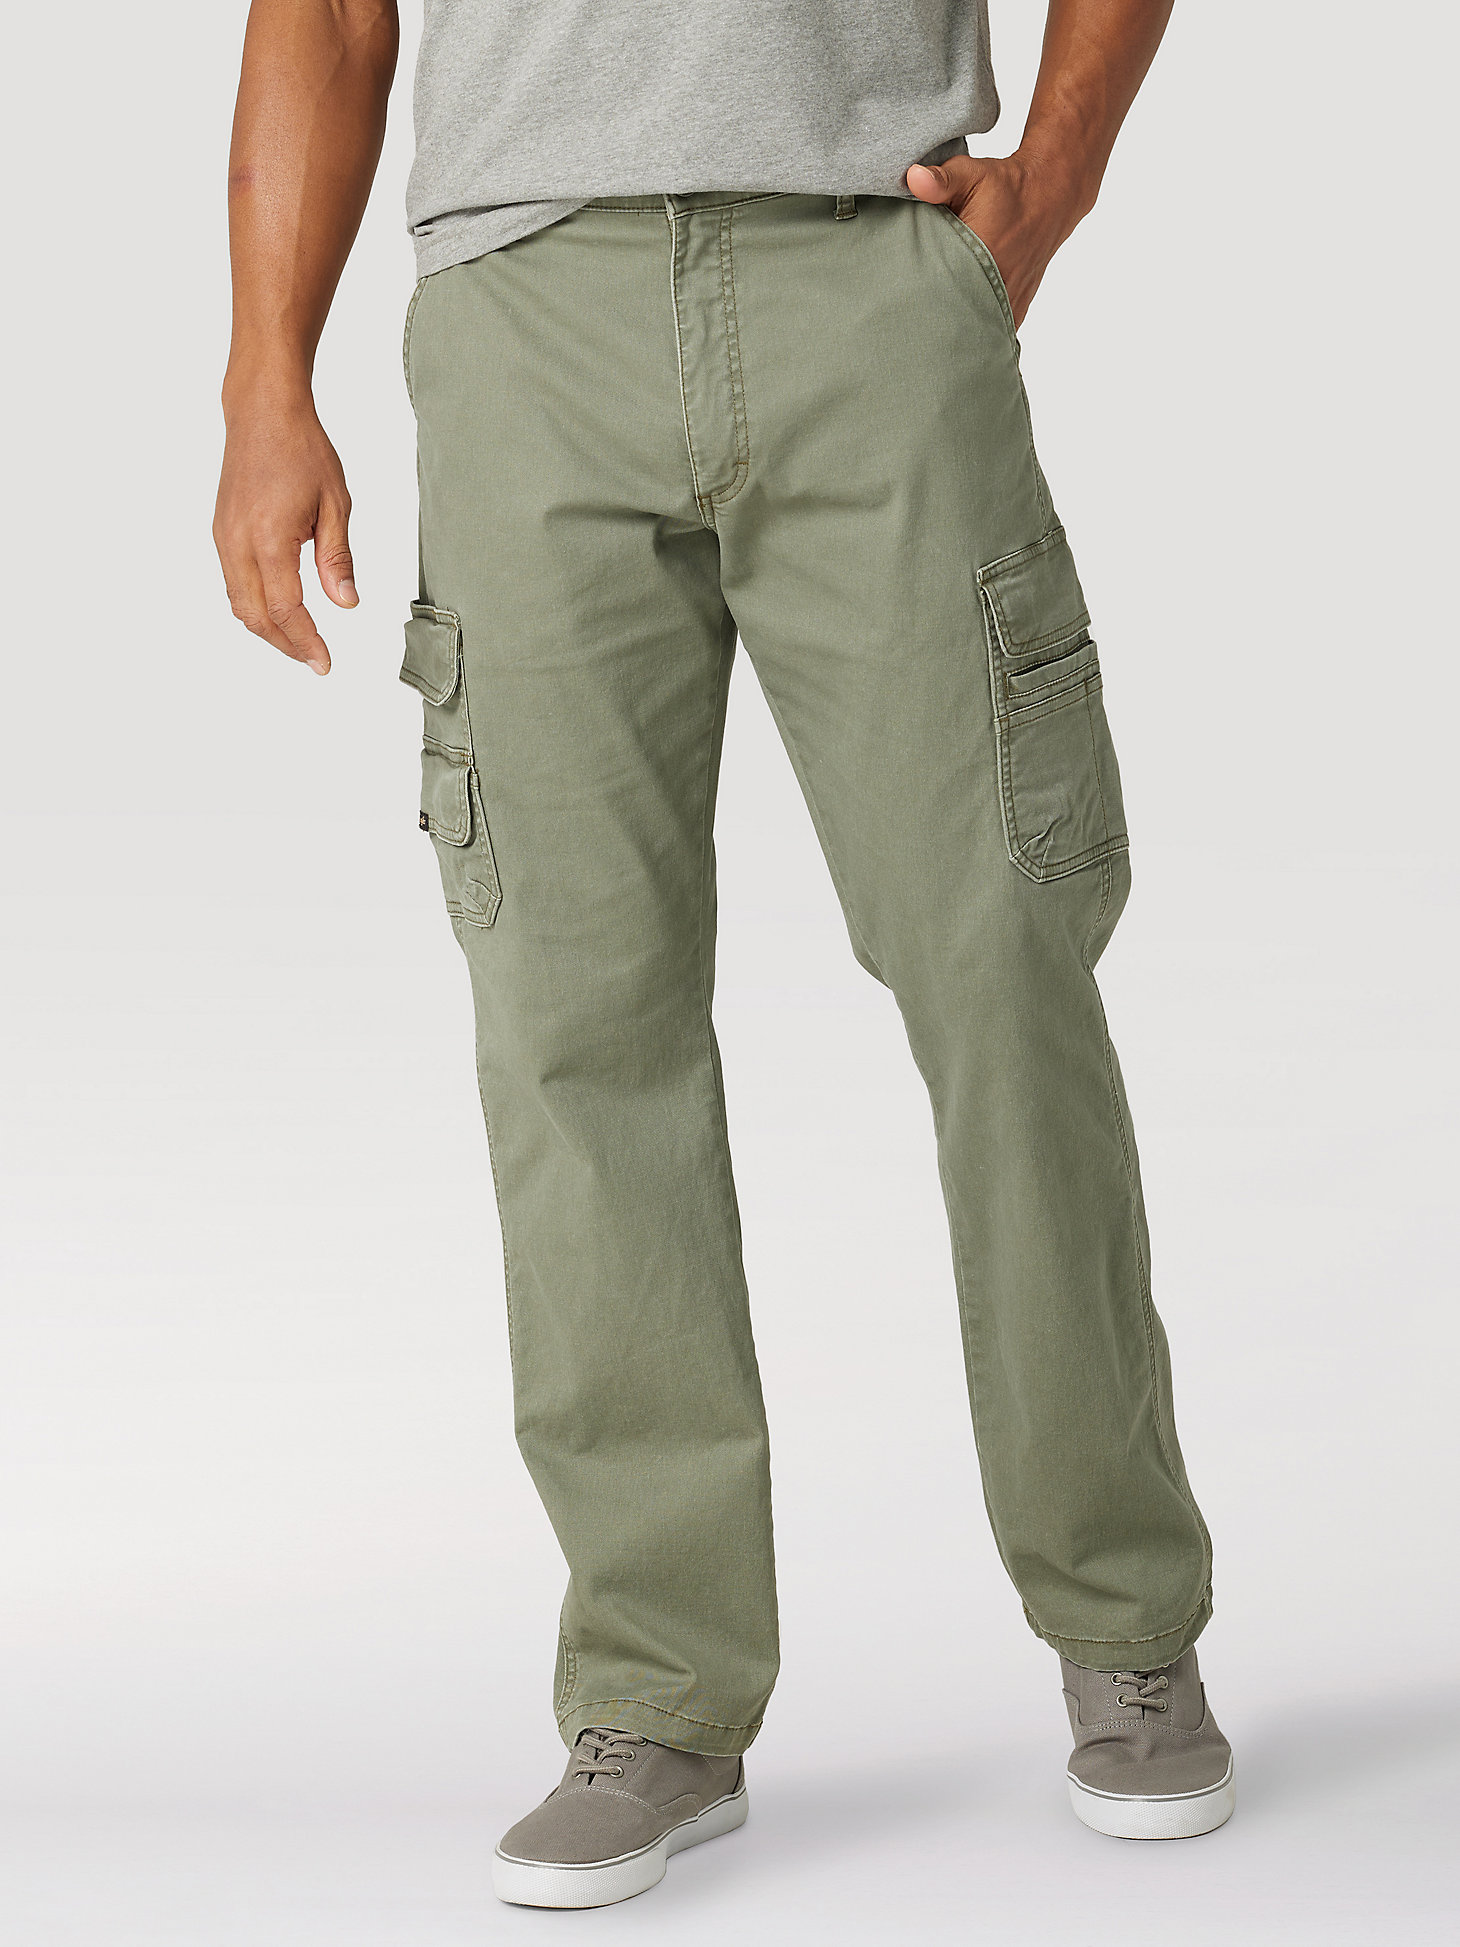 Men's Epic Soft Cargo Pant in Spruce main view